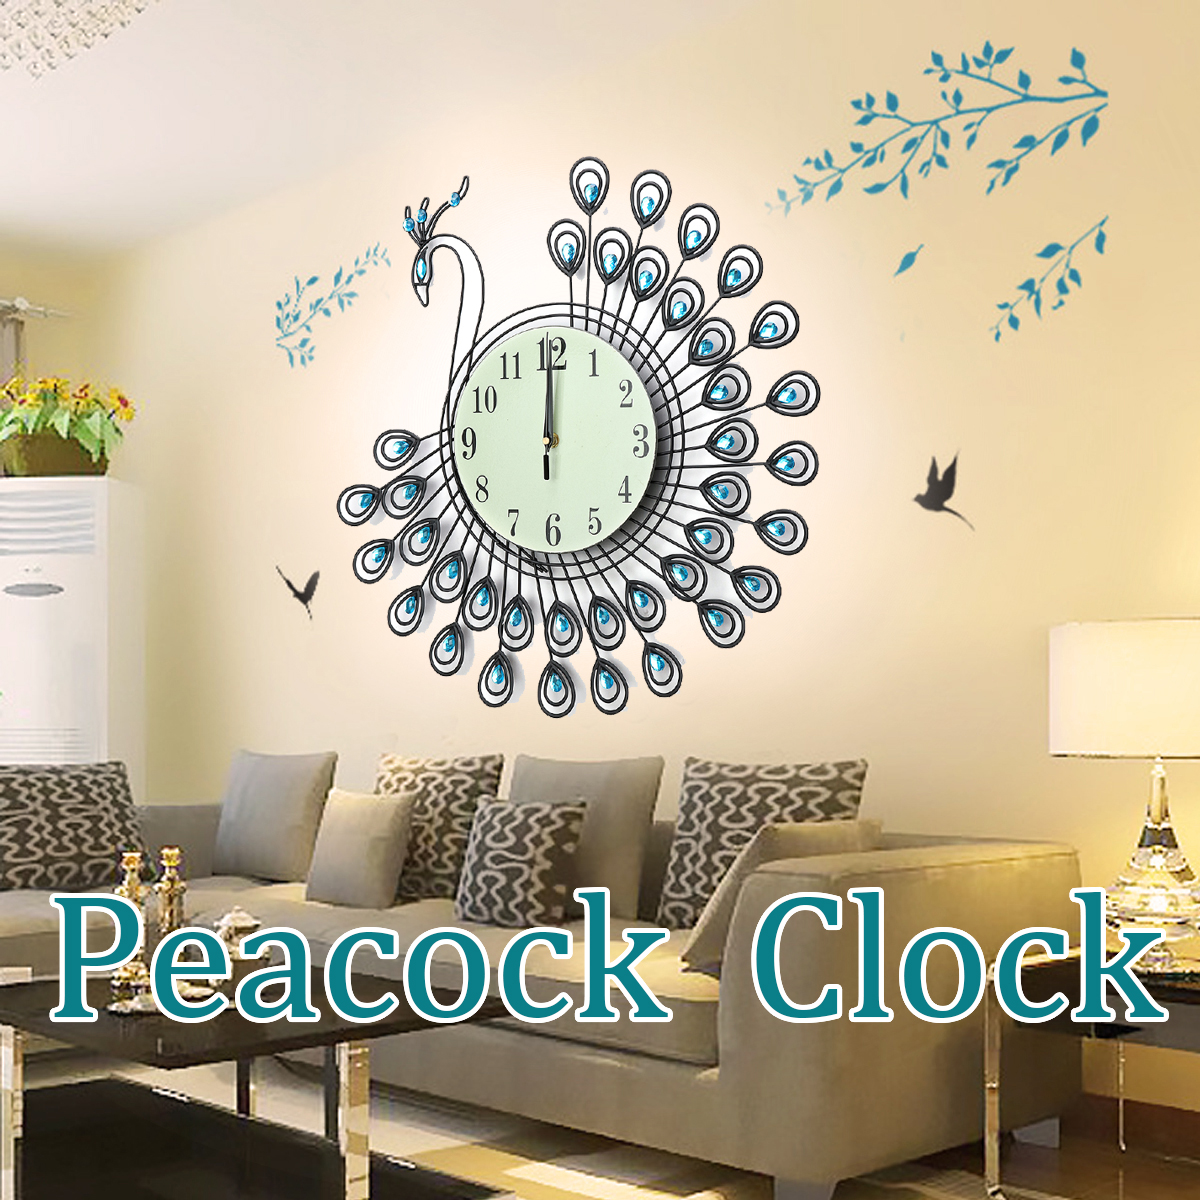 54x54cm-Peacock-Large-Wall-Clock-Grow-In-Dark-Living-Room-Bedroom-House-Decorations-1450327-1